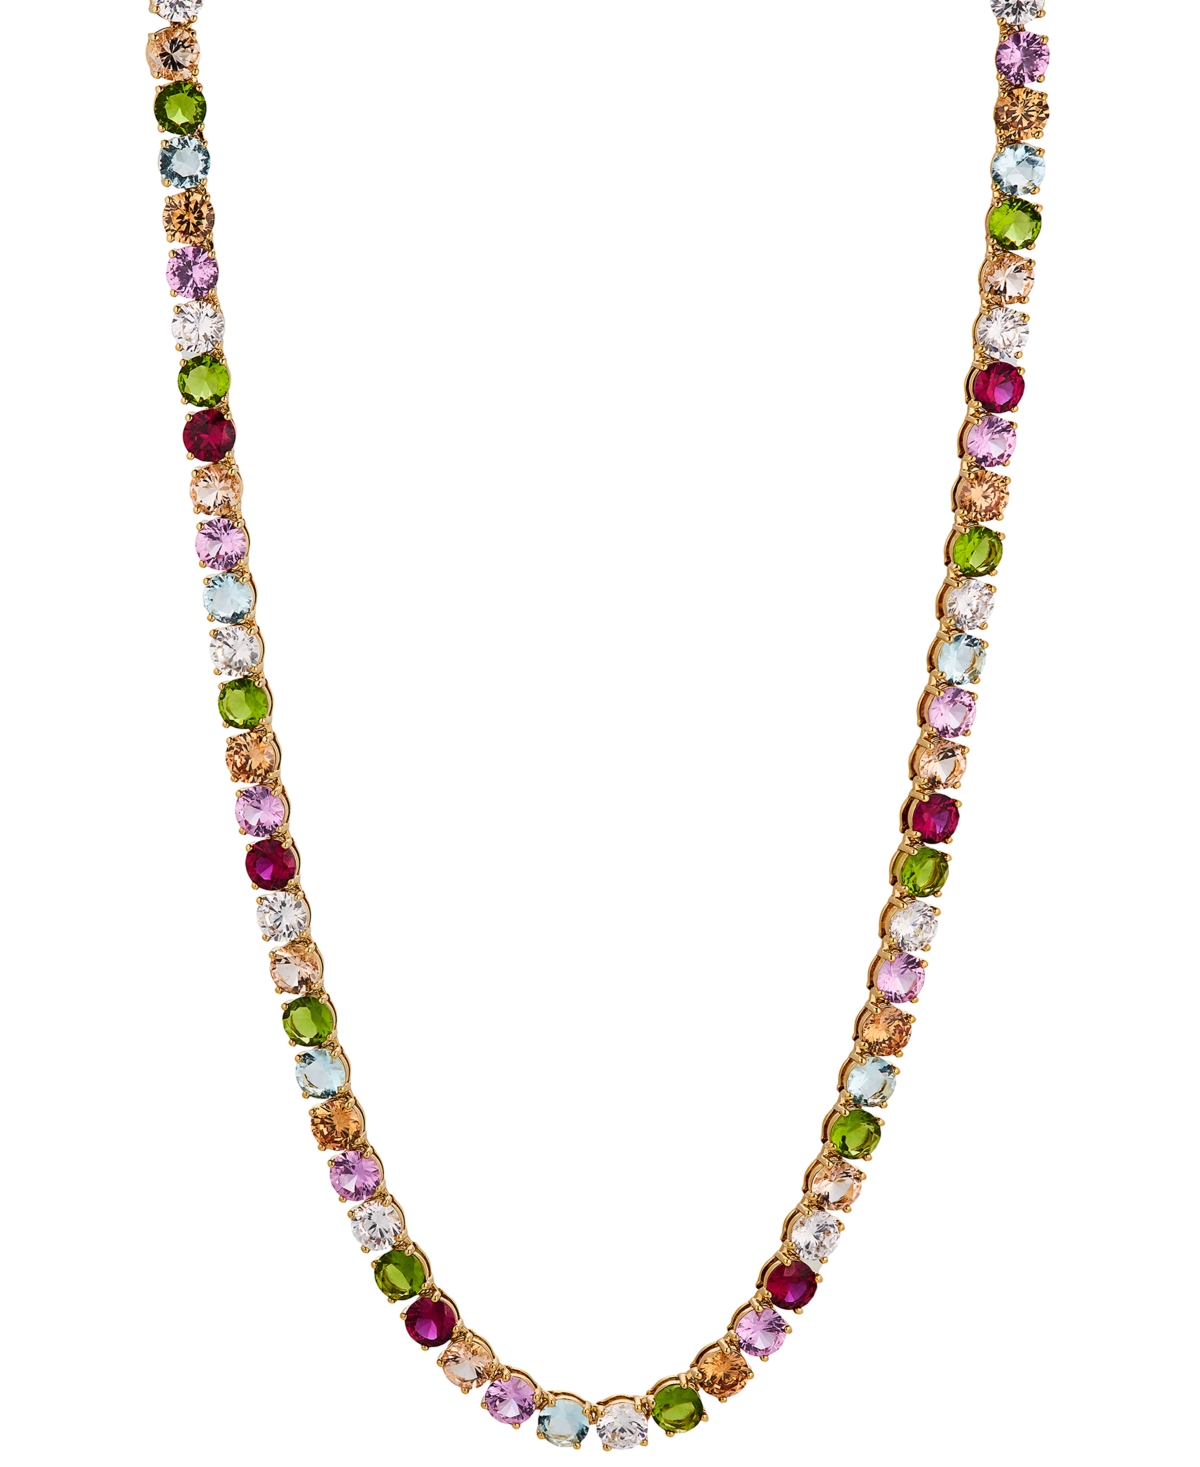 18k Gold-Plated Multicolor Mixed Stone 16" Tennis Necklace, Created for Macy's - Gold